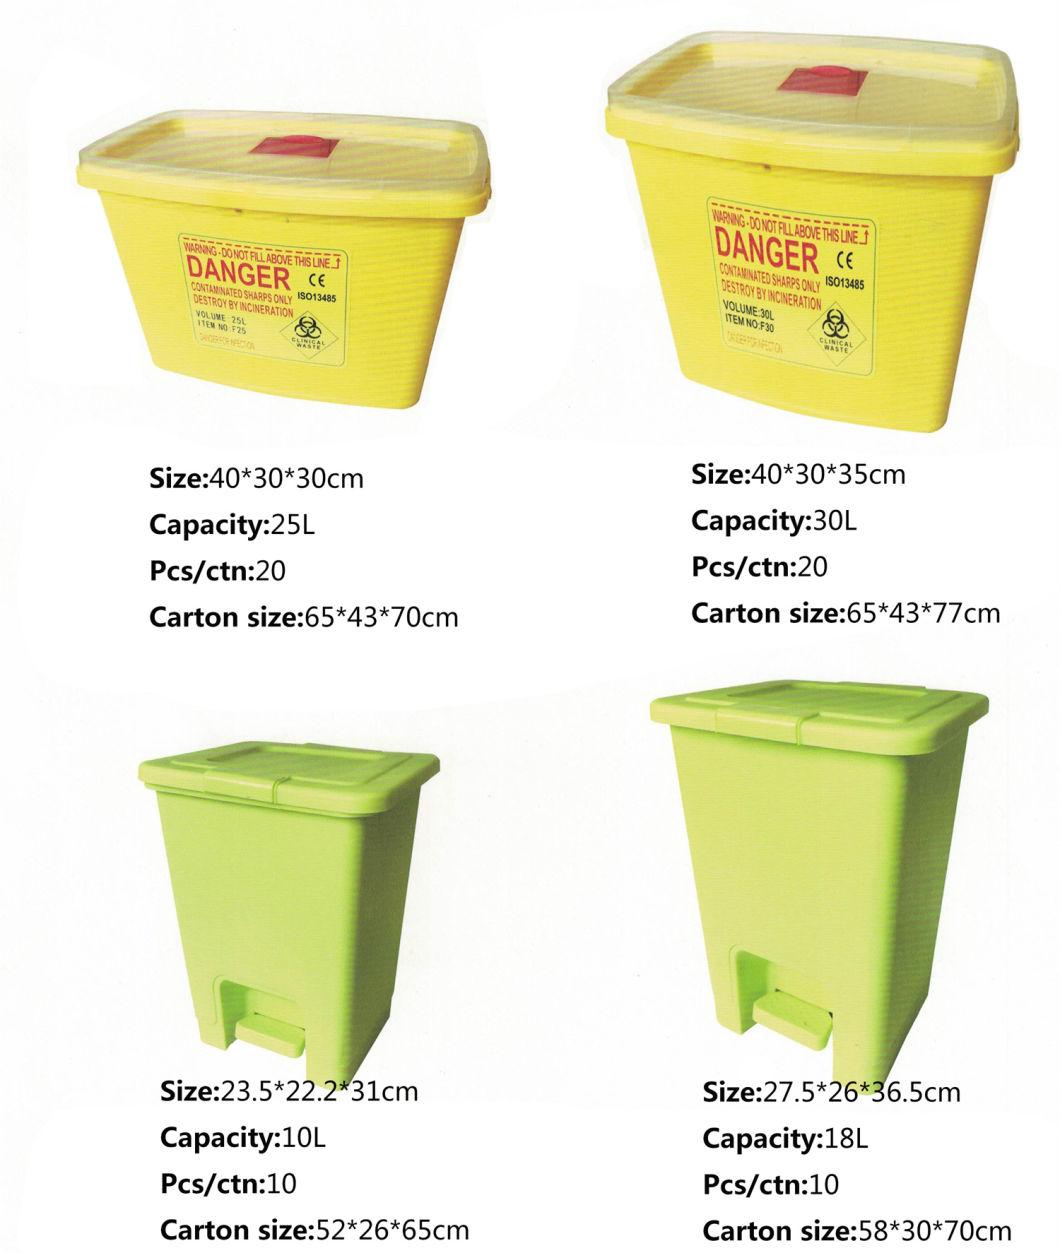 Disposable Blade Waste Box Sharps Container Biohazard Needle Plastic Portable Anti-Puncture Sharps Collector